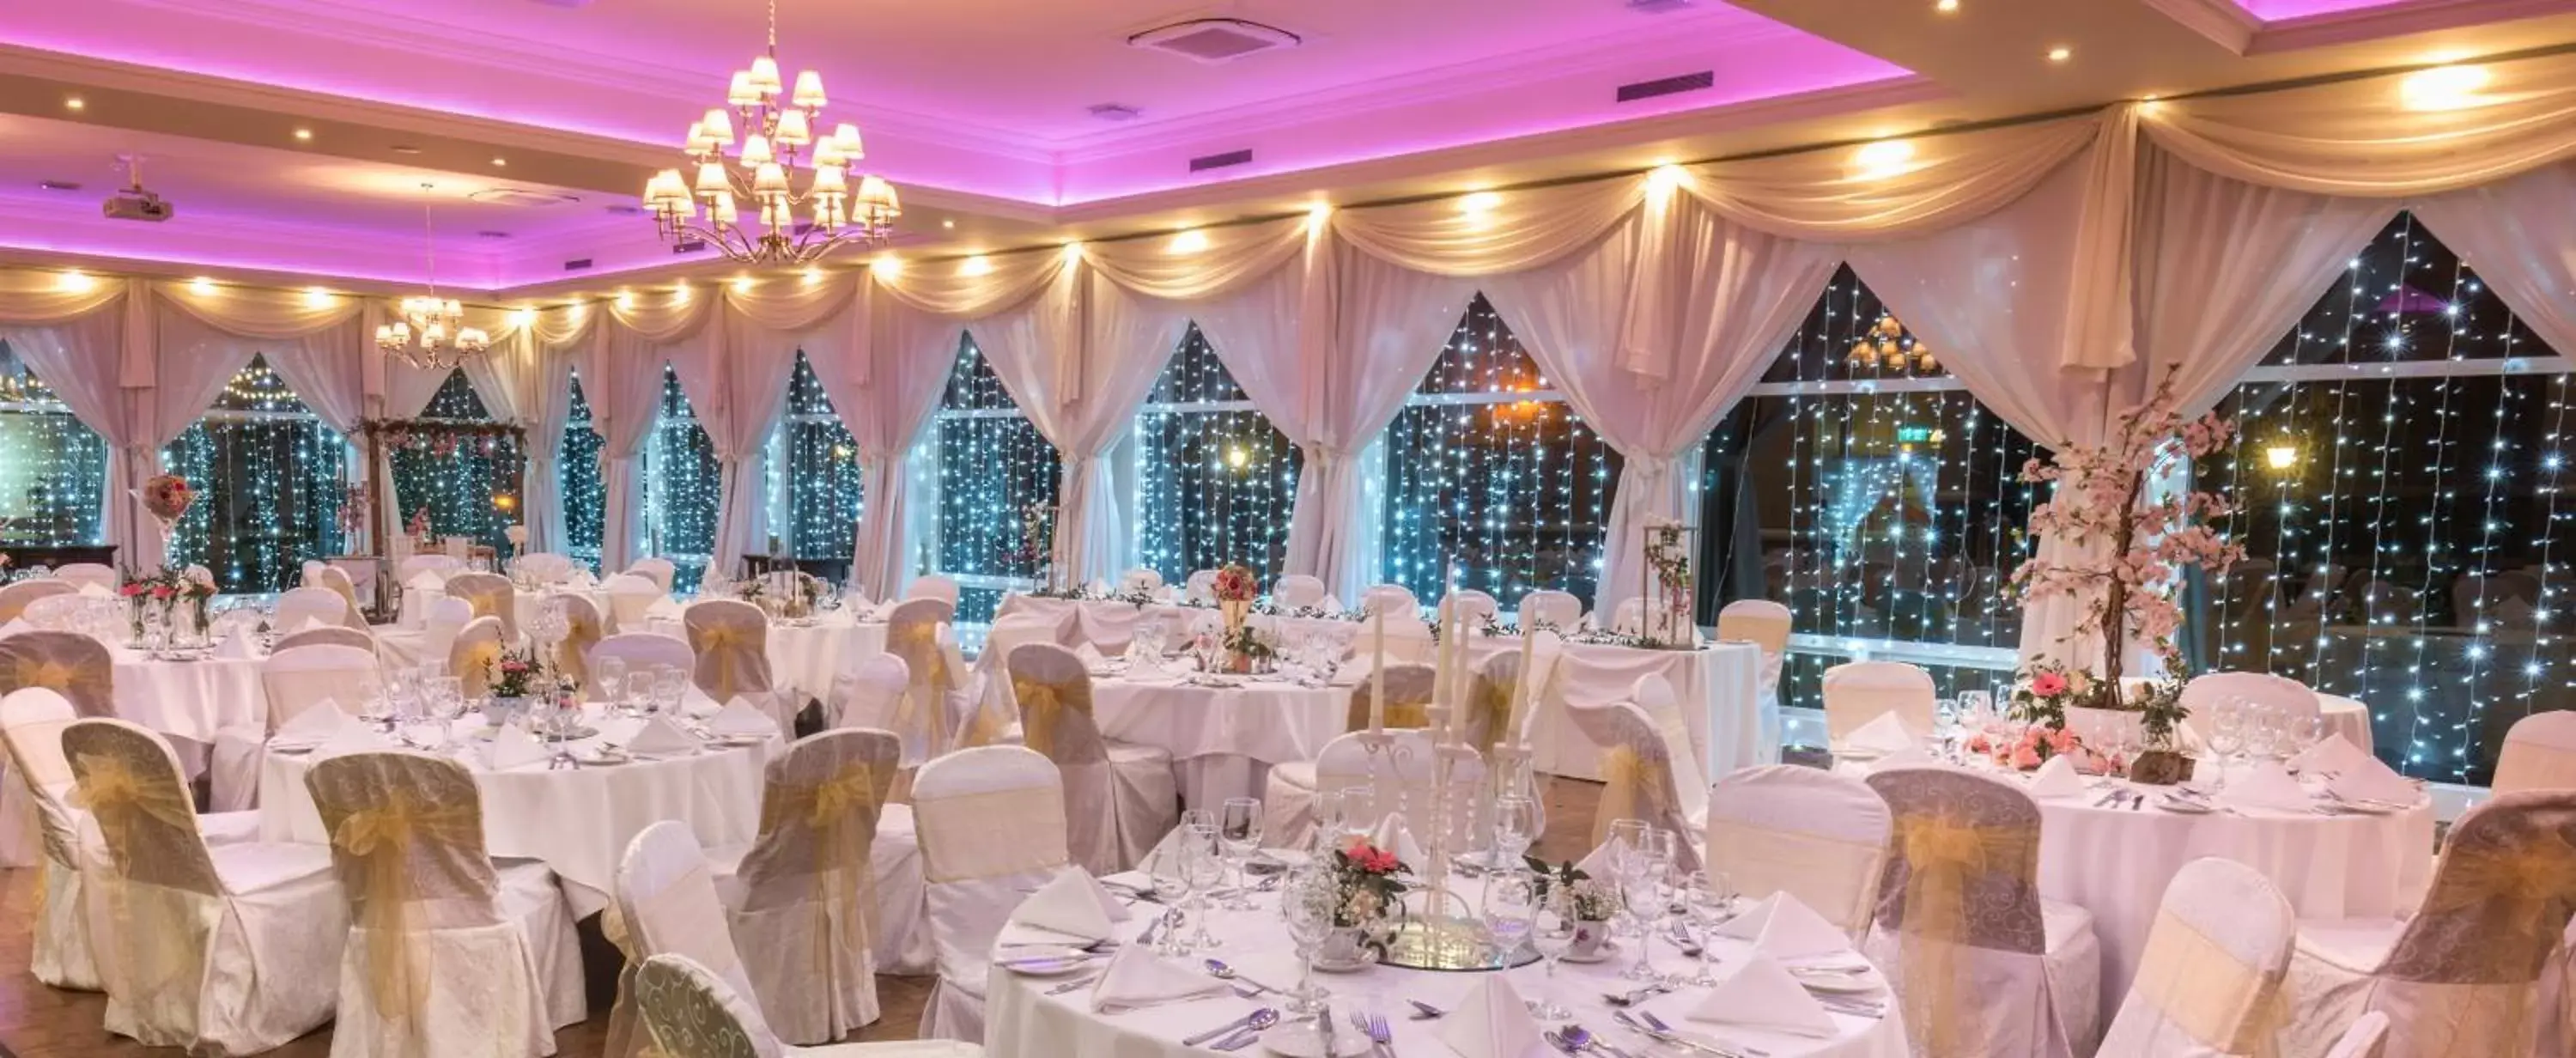 Area and facilities, Banquet Facilities in The Inn at Dromoland